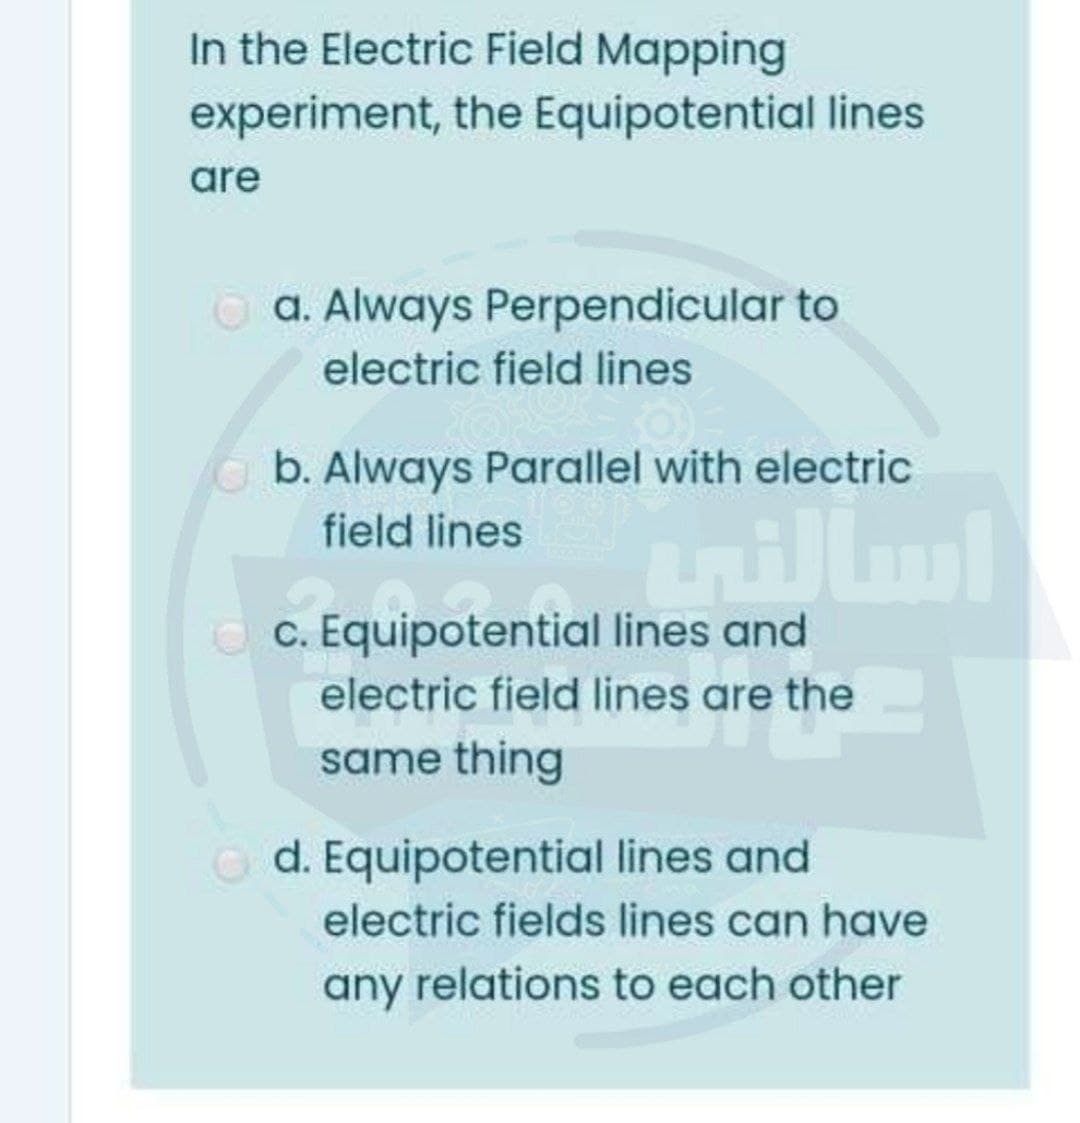 In the Electric Field Mapping
experiment, the Equipotential lines
are
O a. Always Perpendicular to
electric field lines
b. Always Parallel with electric
field lines
nillm
c. Equipotential lines and
electric field lines are the
same thing
d. Equipotential lines and
electric fields lines can have
any relations to each other
